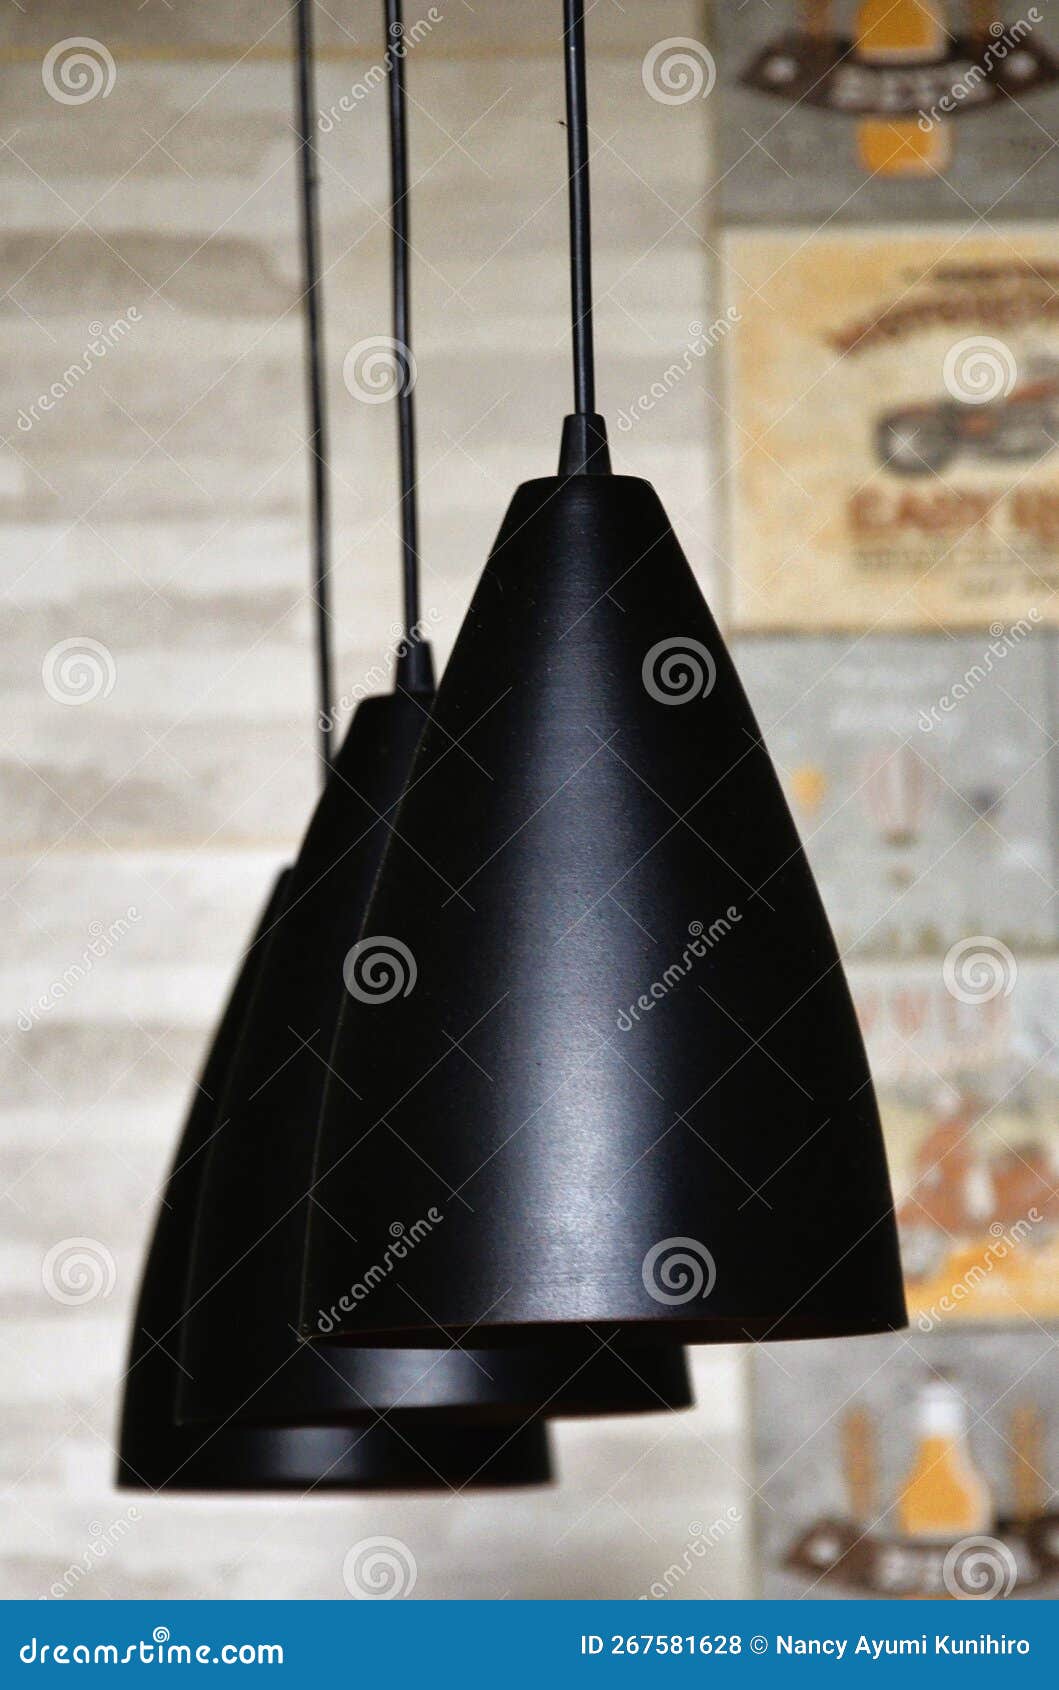 modern black domes hanging from the ceiling illuminating and decorating the kitchen